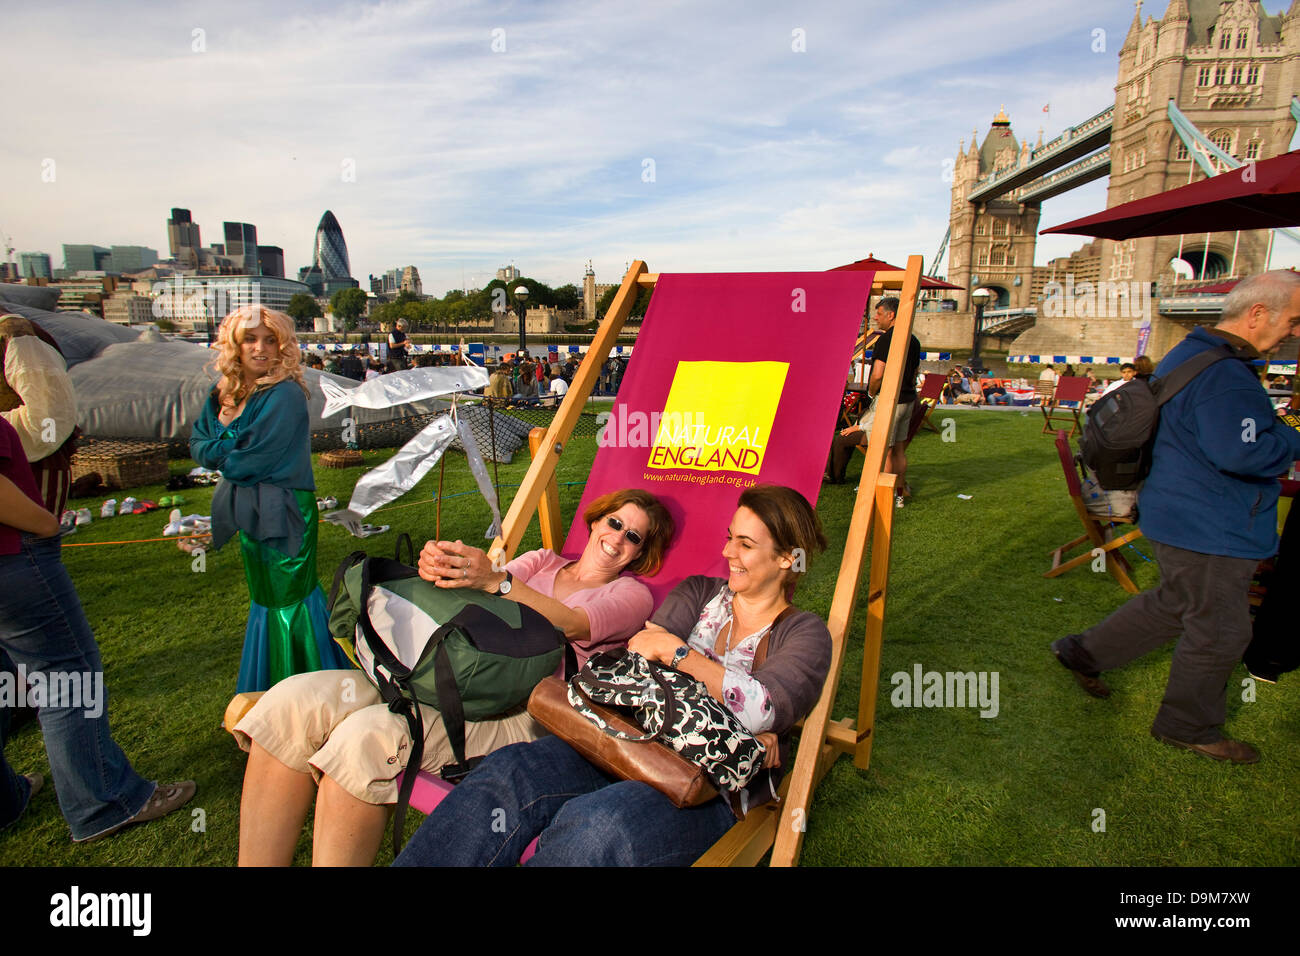 2 girls laughing on giant deckchair promoting England, Thames Festival 08 Stock Photo